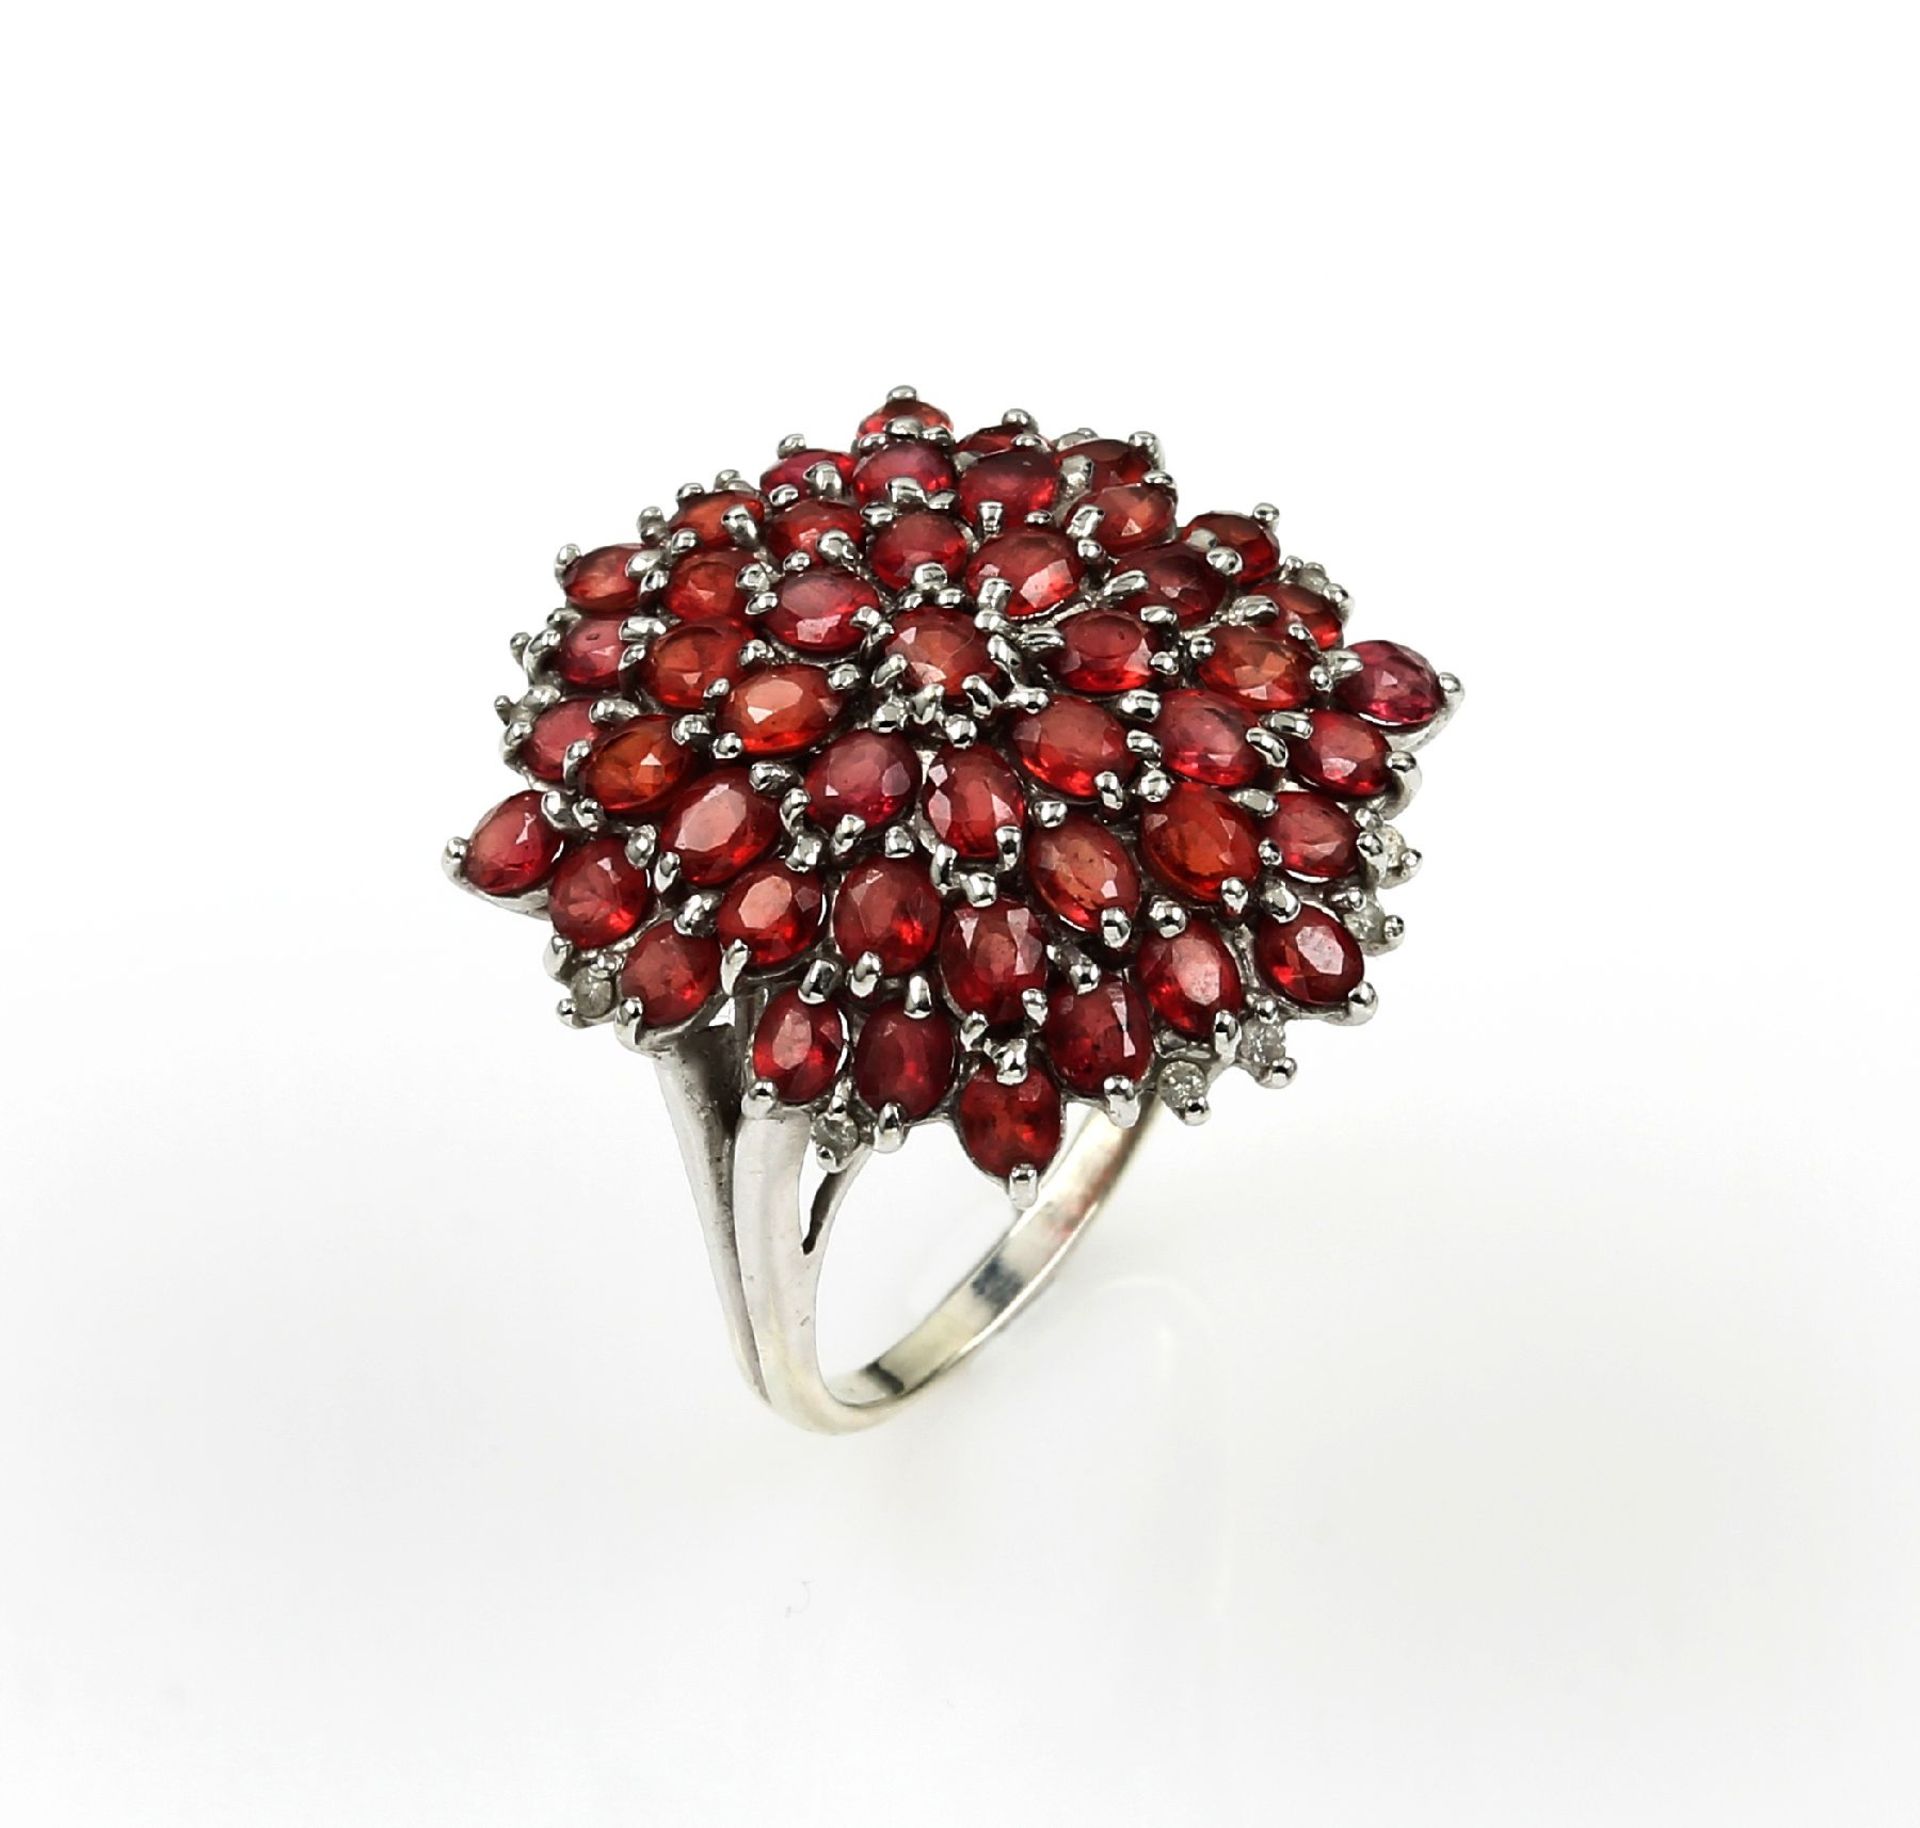 9 kt gold ring with red sapphires , WG 375/000, round bevelled padparadschacoloured sapphires (